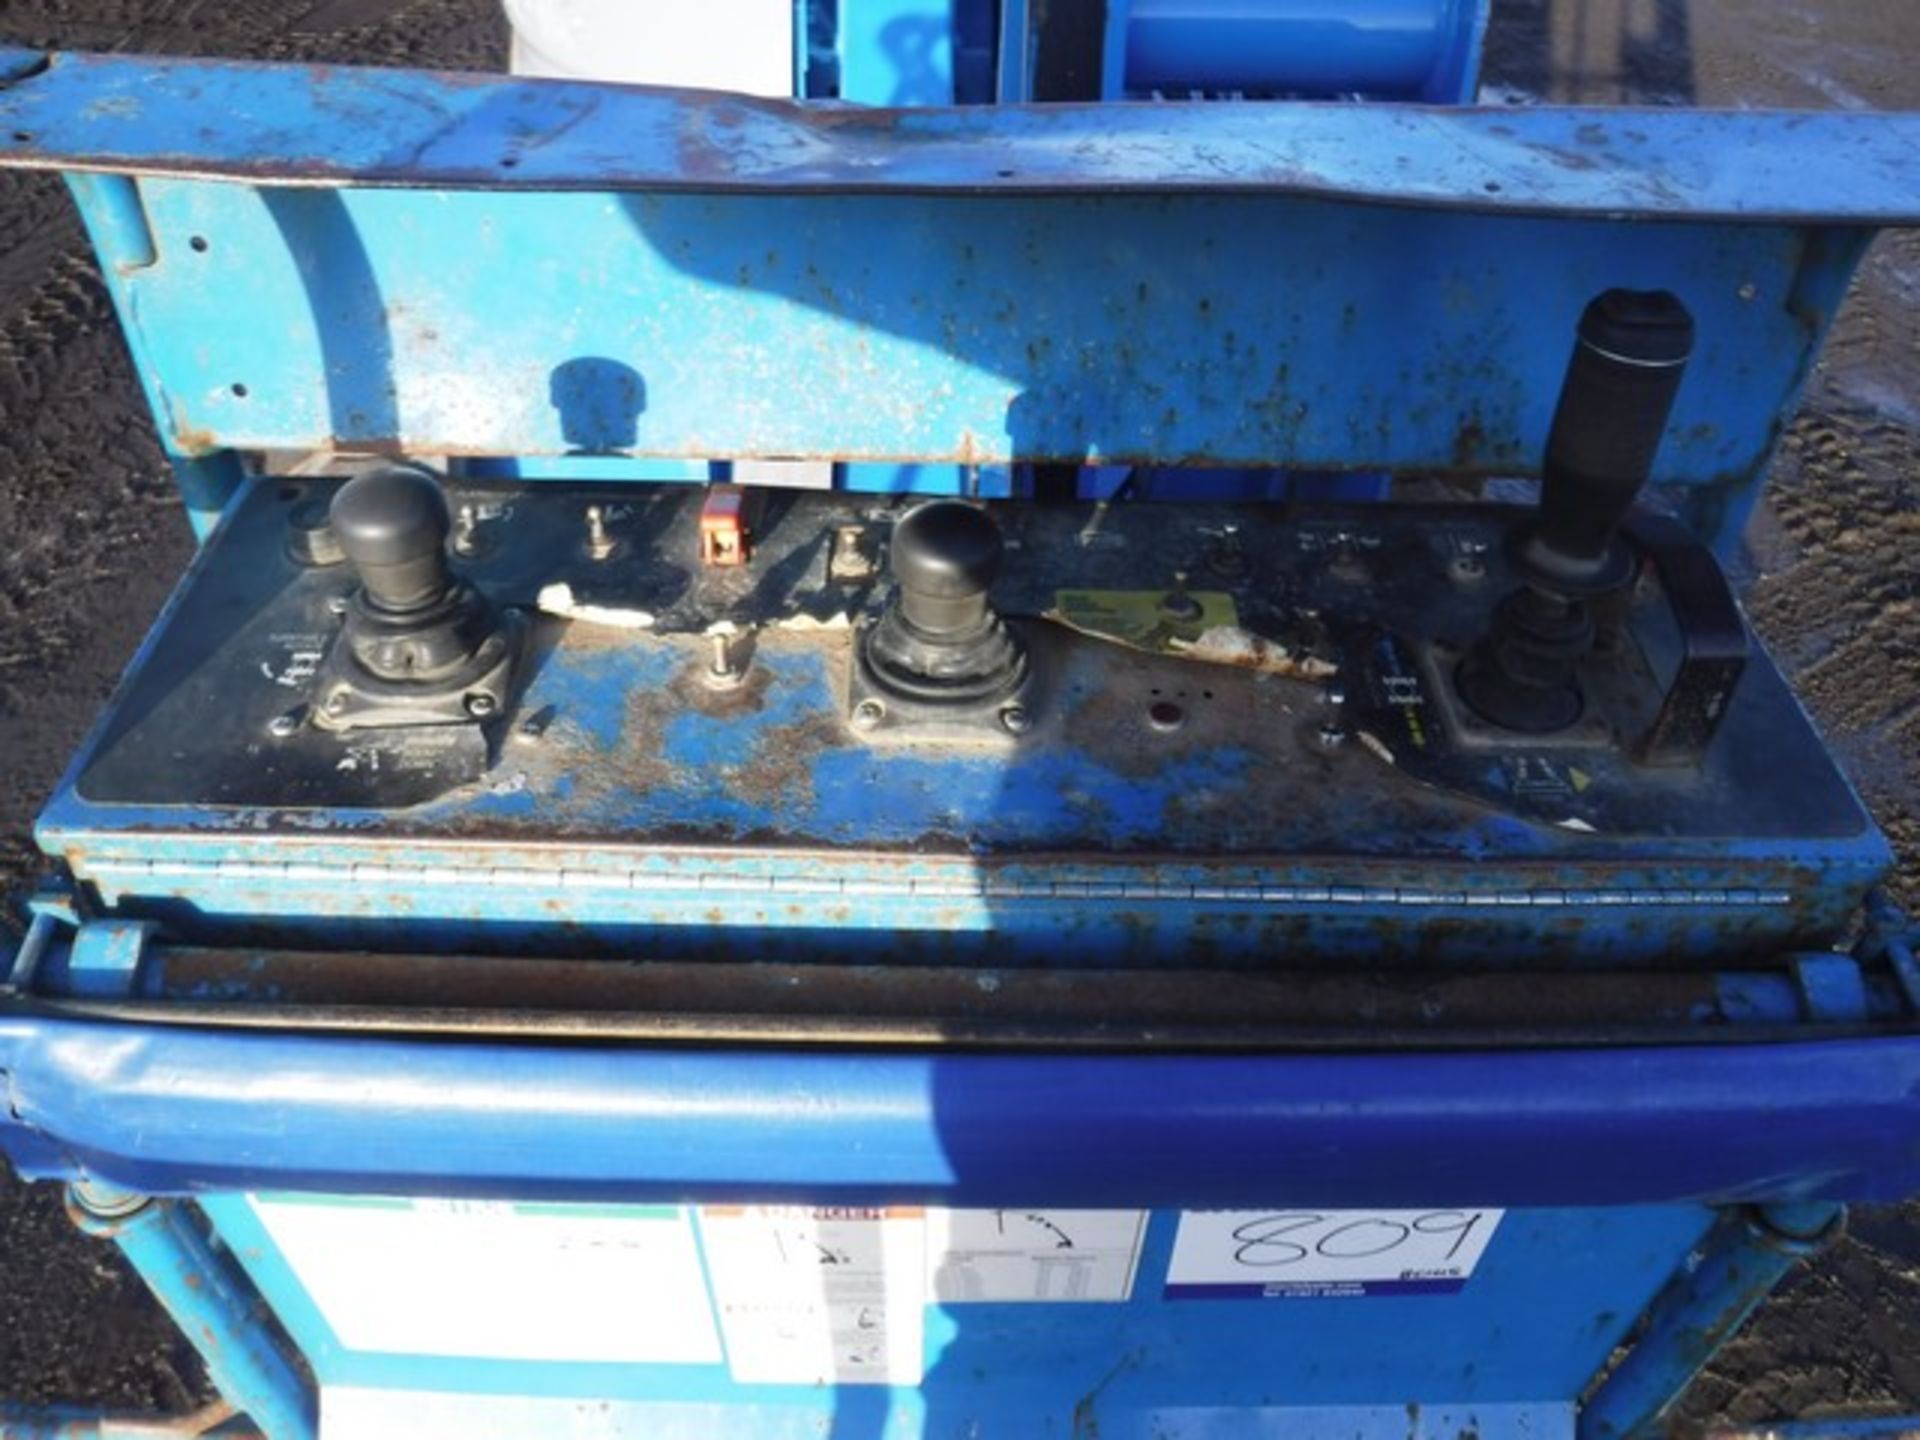 2000 GENIE MODEL Z45-25, S/N 15155, 8046HRS (NOT VERIFIED), LIFT CAPACITY - 230 - Image 7 of 17